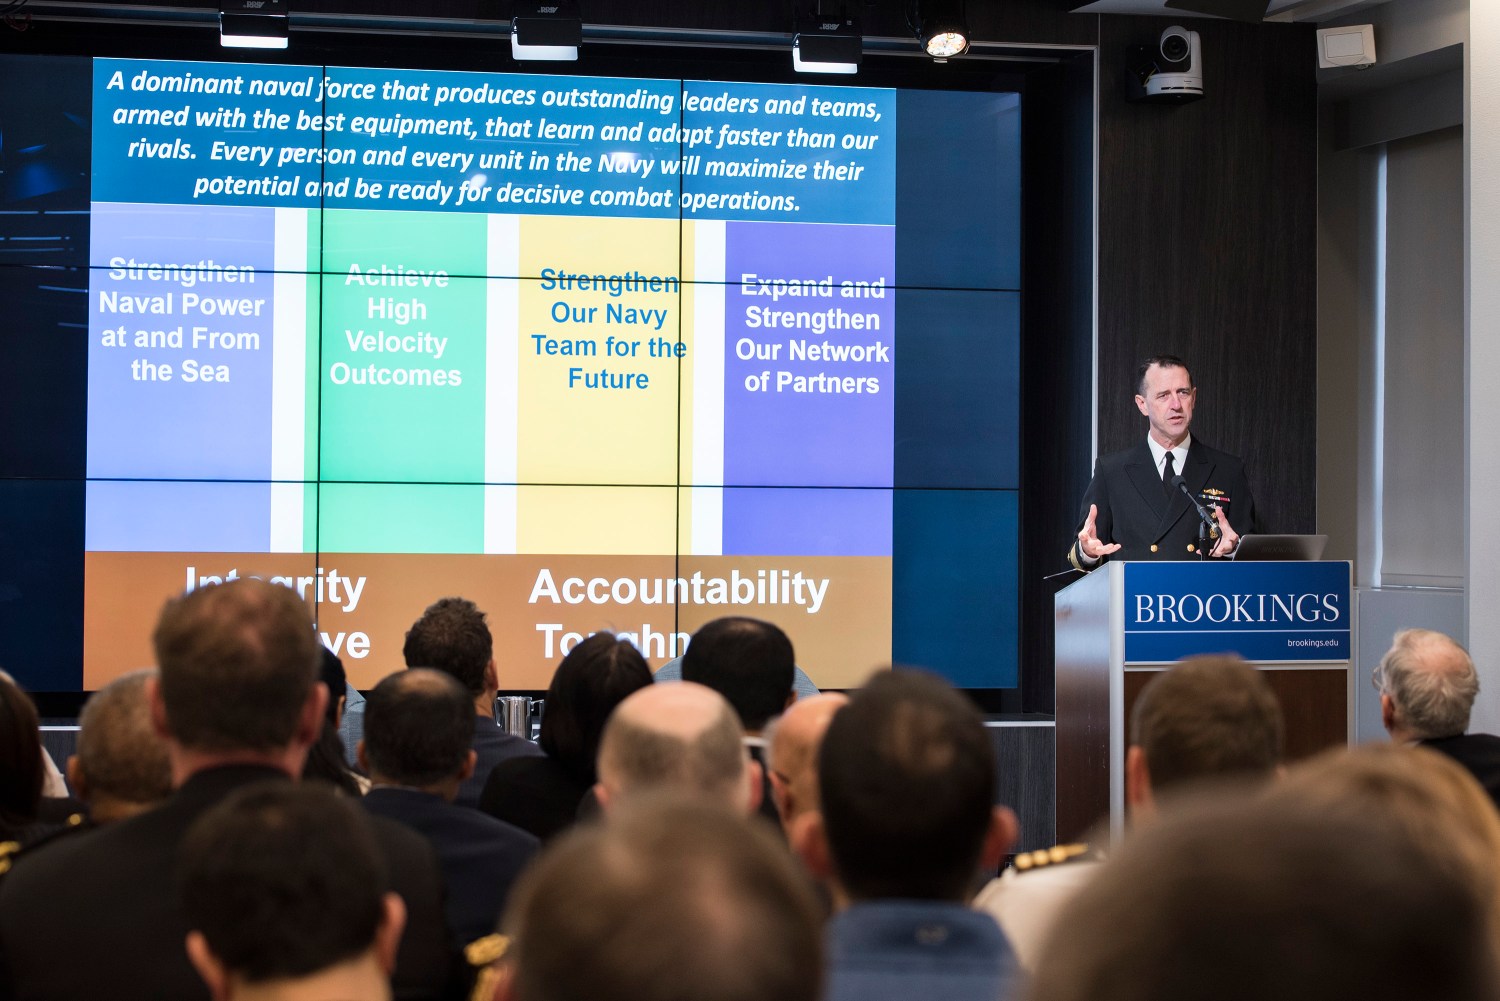 190128-N-BB269-0048 WASHINGTON (Jan. 28, 2019) Chief of Naval Operations (CNO) Adm. John Richardson delivers remarks during a discussion held at the Brookings Institution. Richardson discussed the U.S. NavyÕs recently released document, ÒA Design for Maintaining Maritime Superiority, Version 2.0Ó and answered questions from the audience. (U.S. Navy photo by Mass Communication Specialist 1st Class Raymond D. Diaz III/Released)